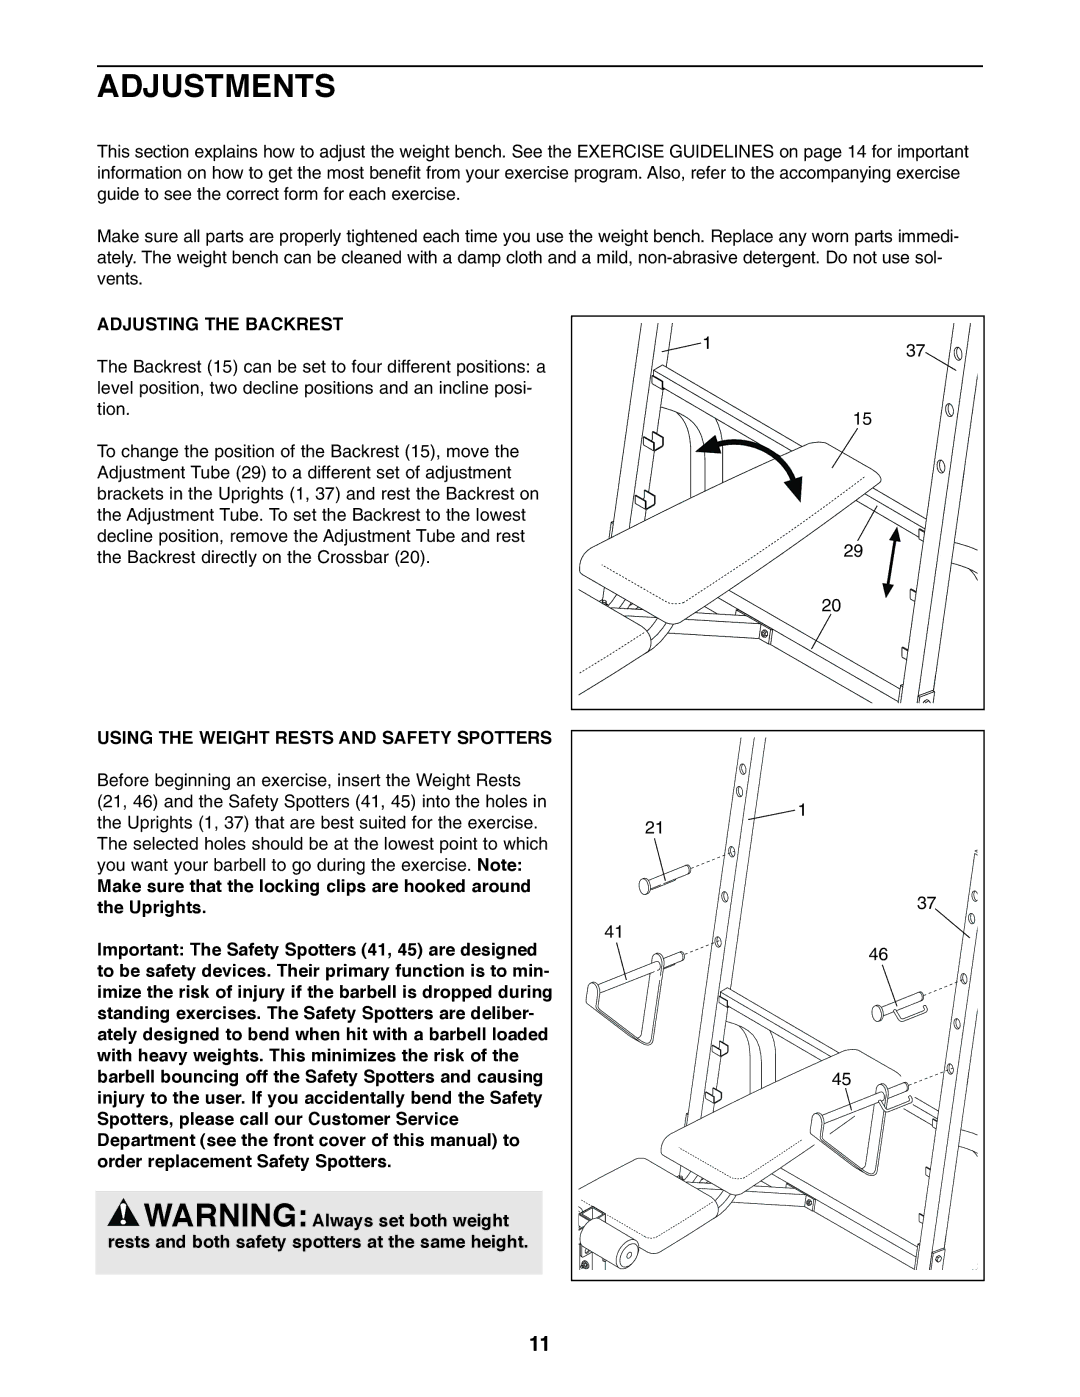 Weider WEBE64410 user manual Adjustments, Adjusting the Backrest, Using the Weight Rests and Safety Spotters 